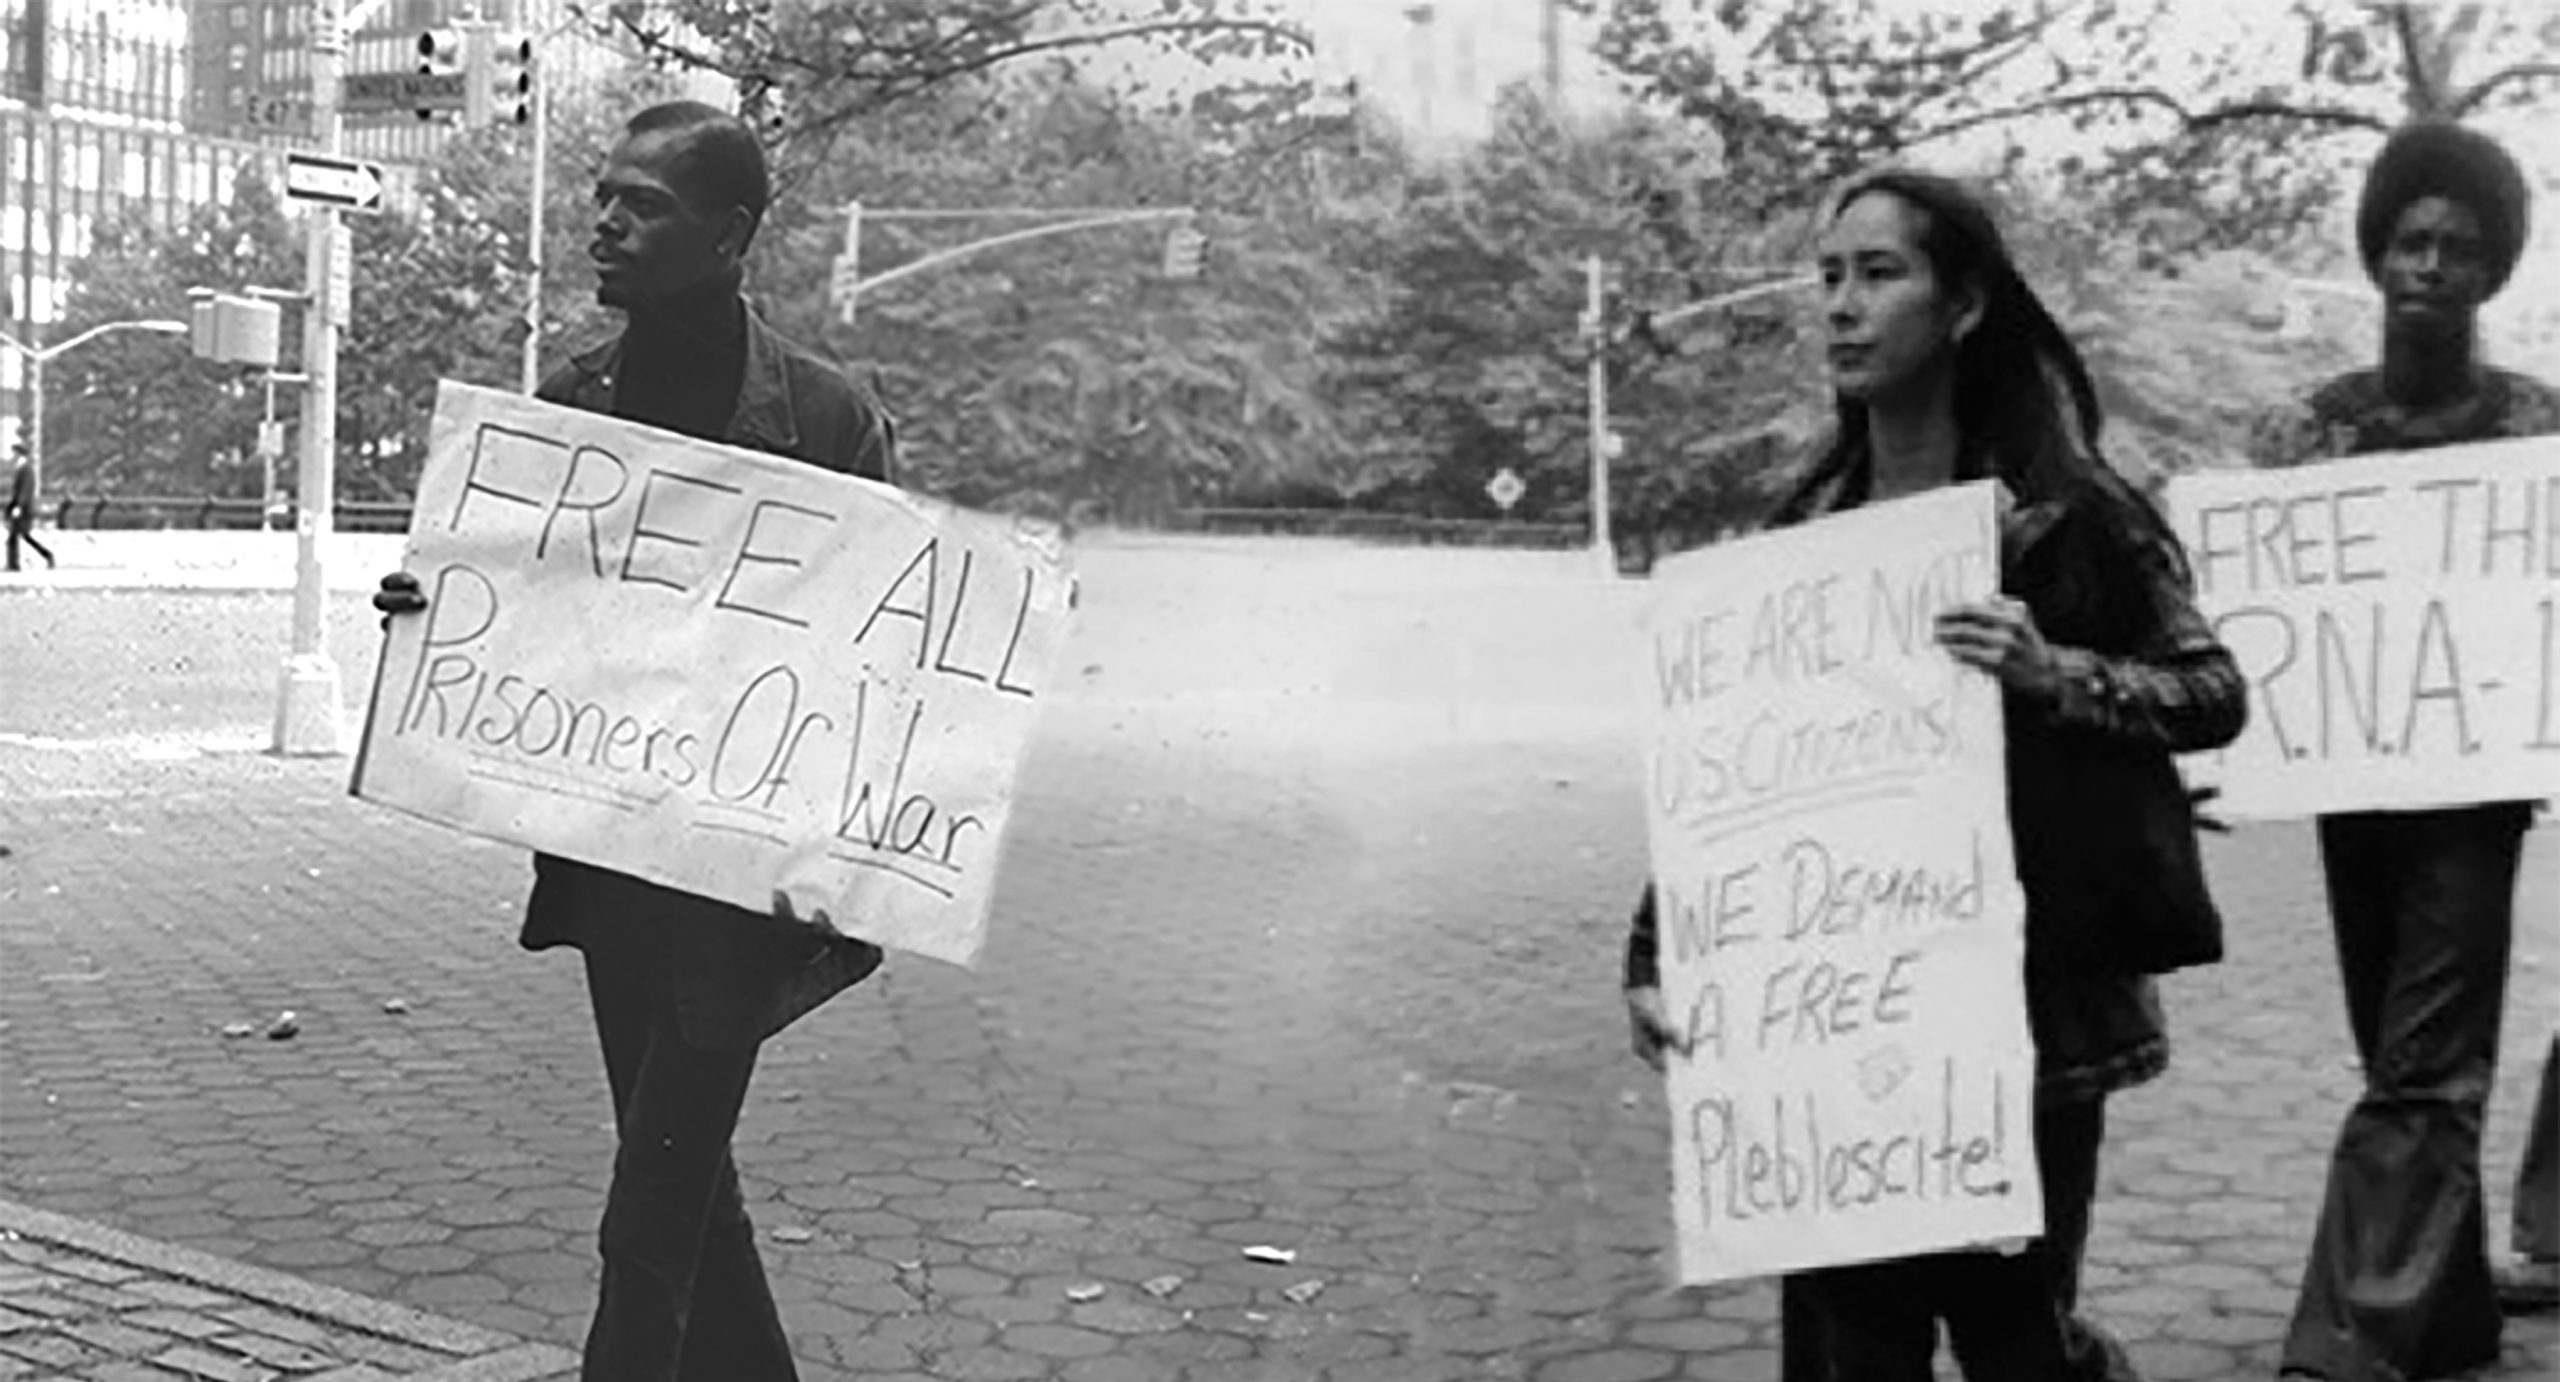 Nobuko Miyamoto, Attallah Ayyubi, and another marcher at a Republic of New Africa demonstration in 1973. They are holding signs that read "Free All Prisoners of War," "We are not US citizens, we demand a free pleblescite!" and "Free the R.N.A."